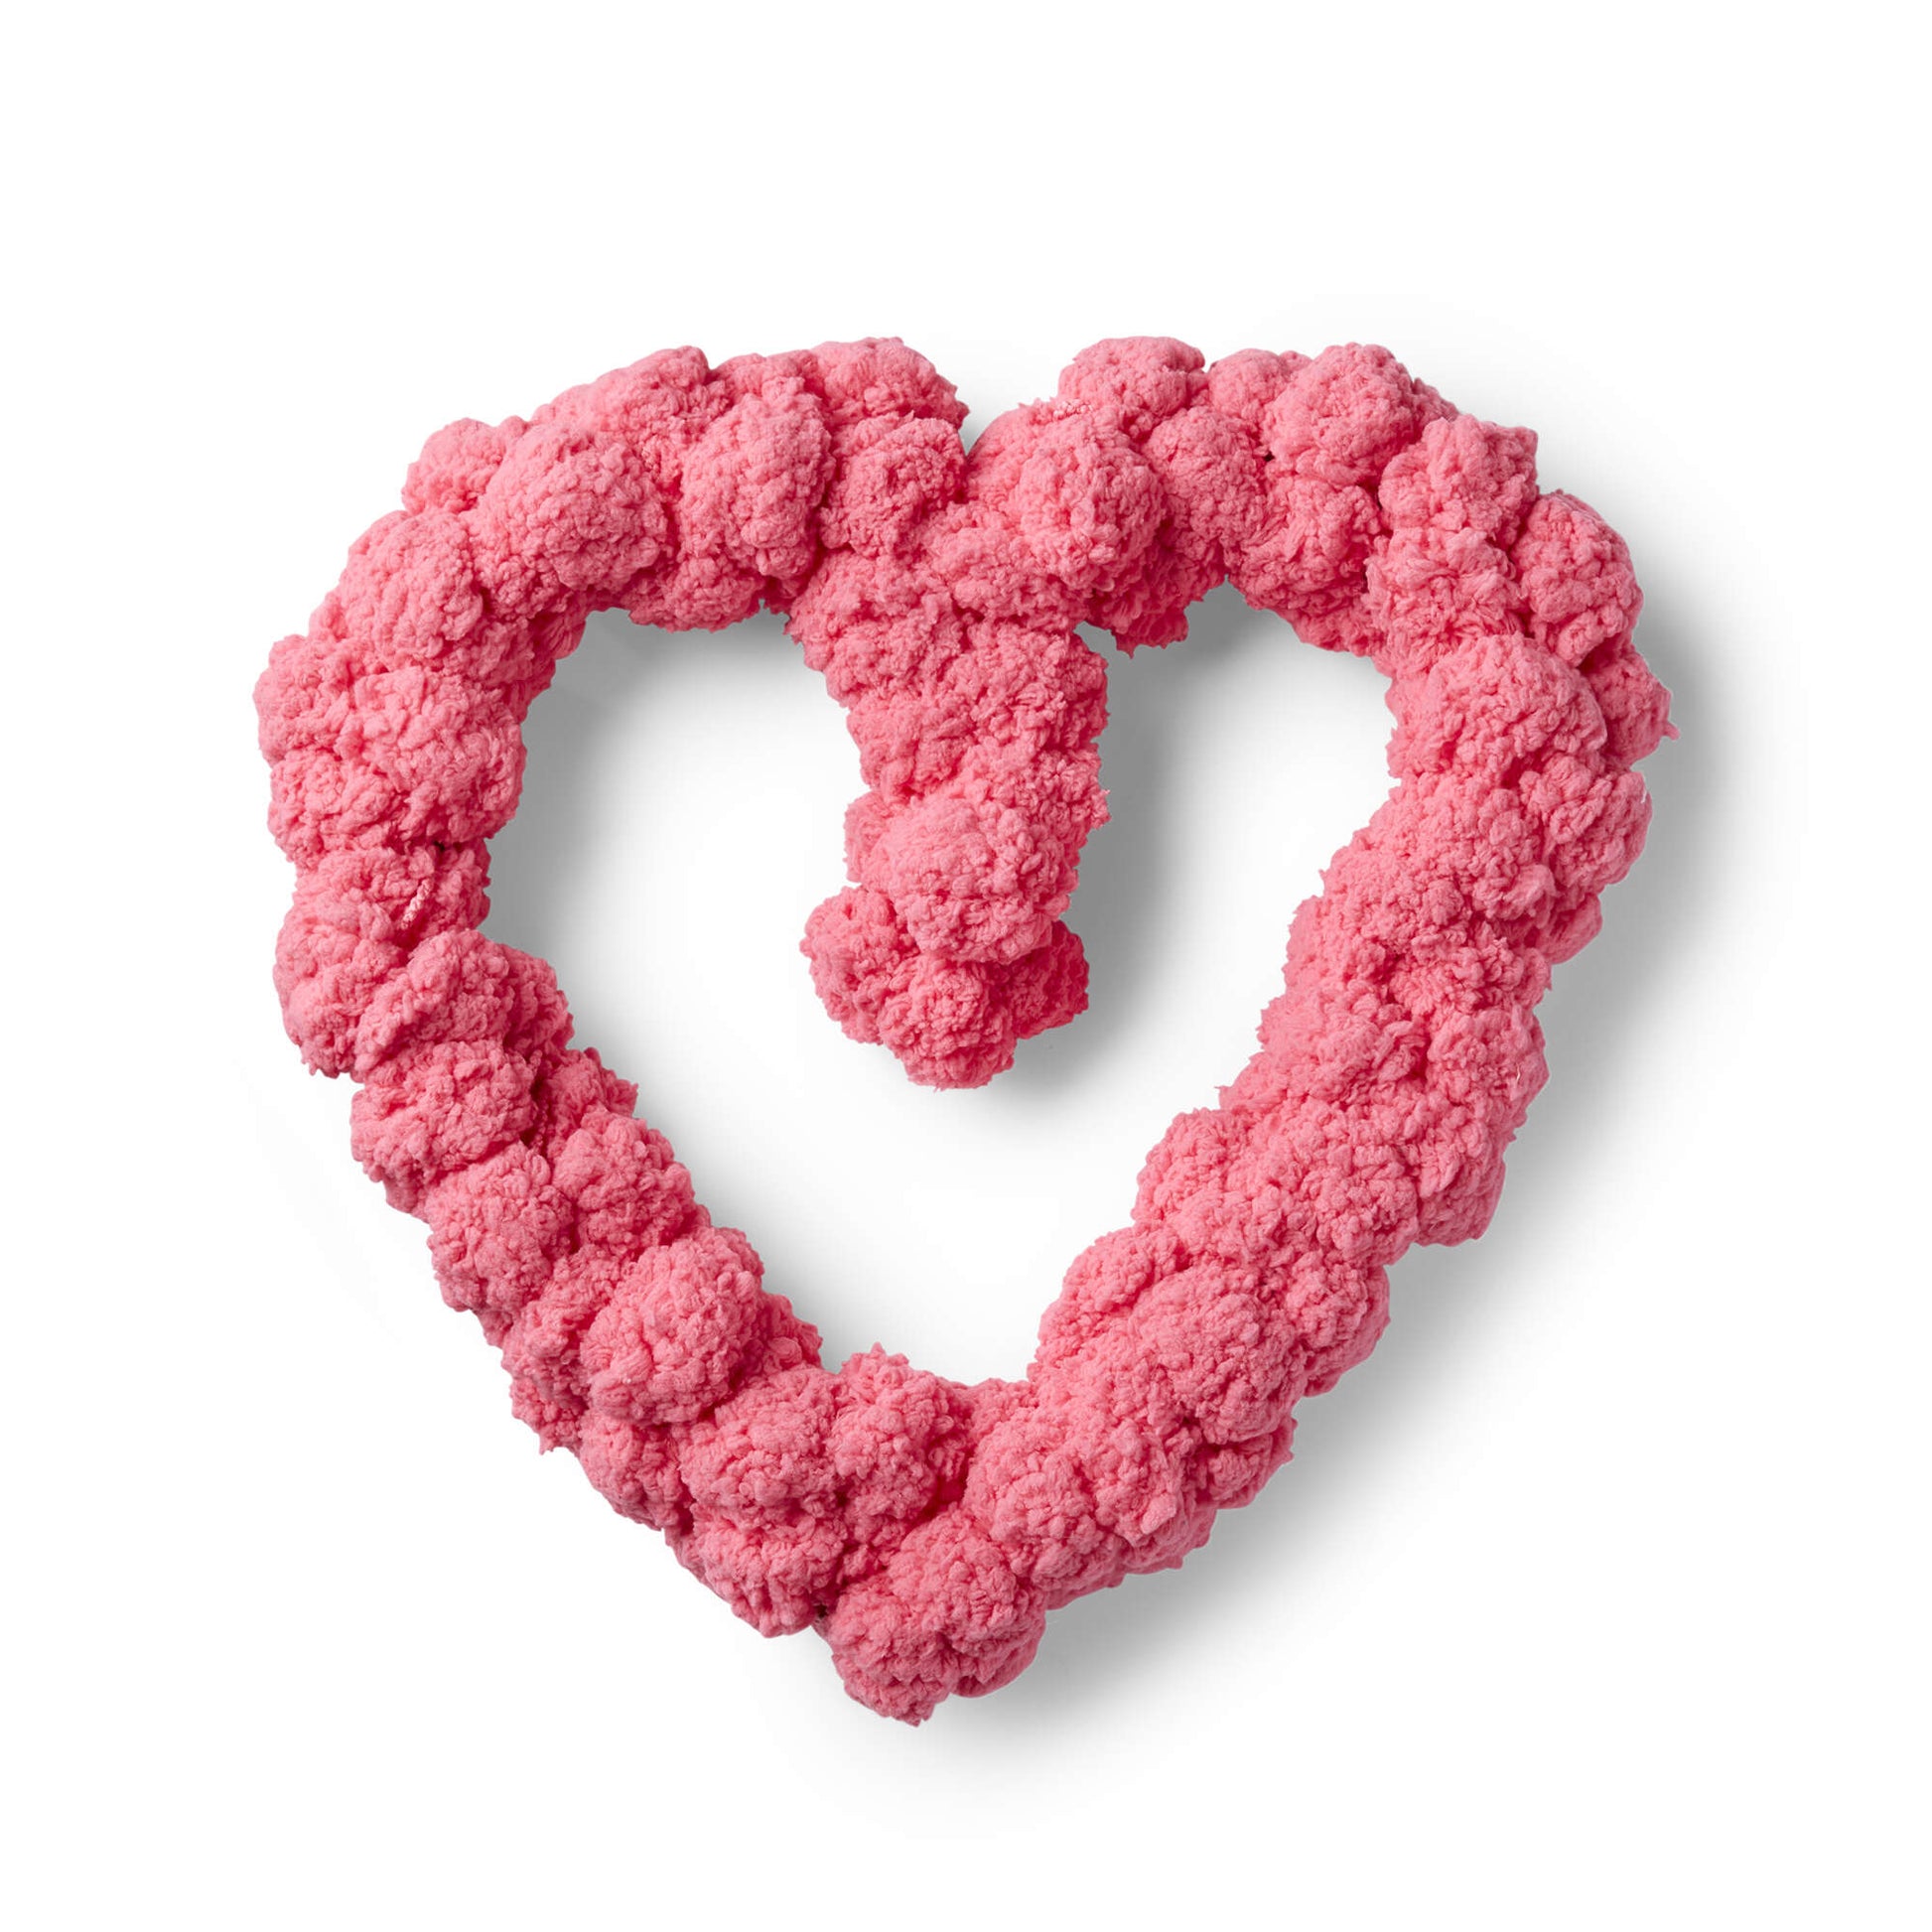 Free Red Heart Pom-dorable Heart Wreath Craft Pattern